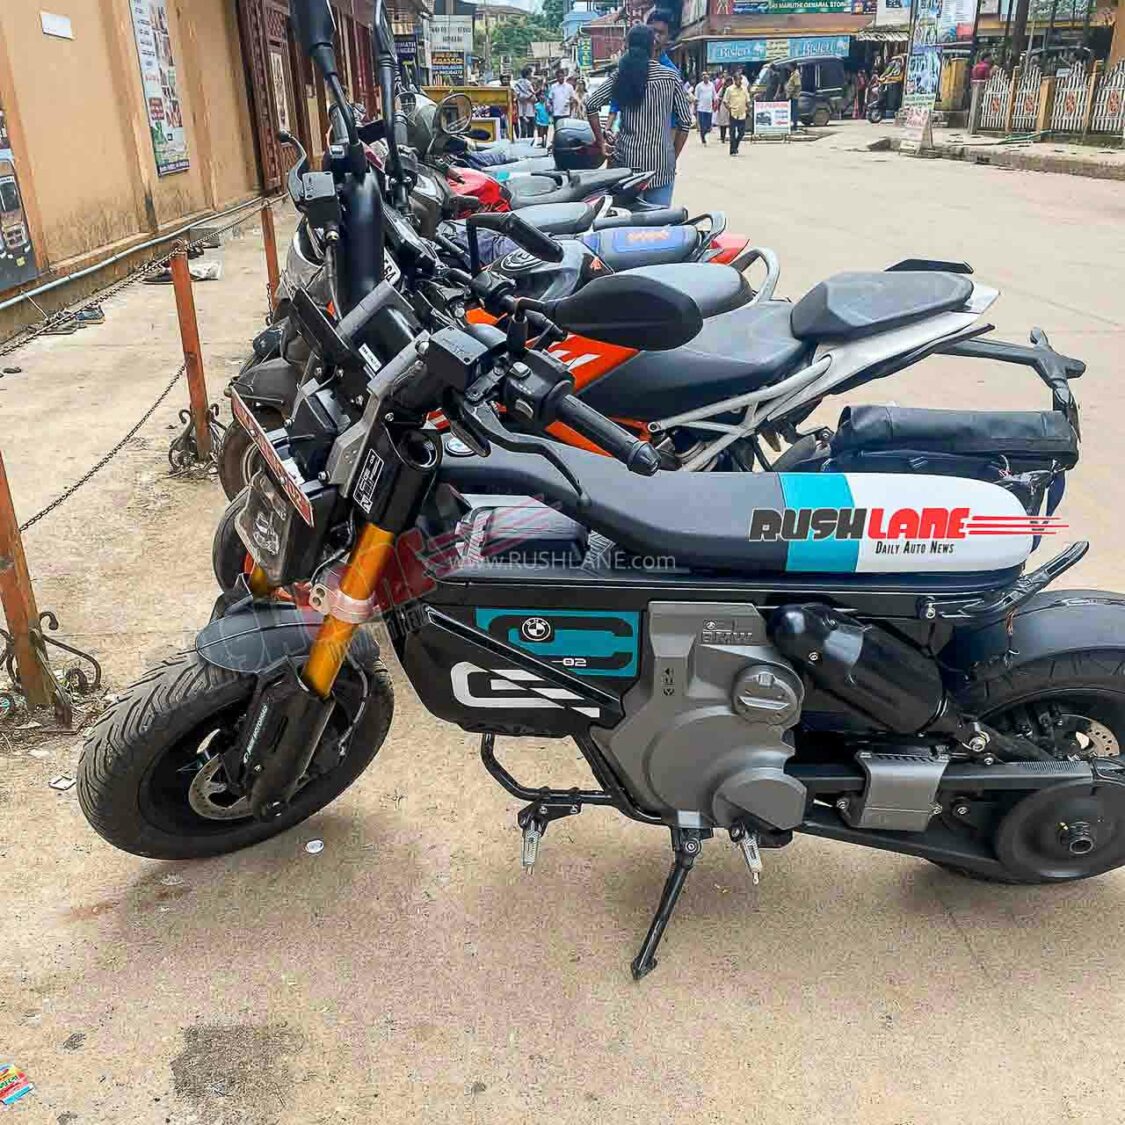 BMW CE02 Electric Scooter Spied In India